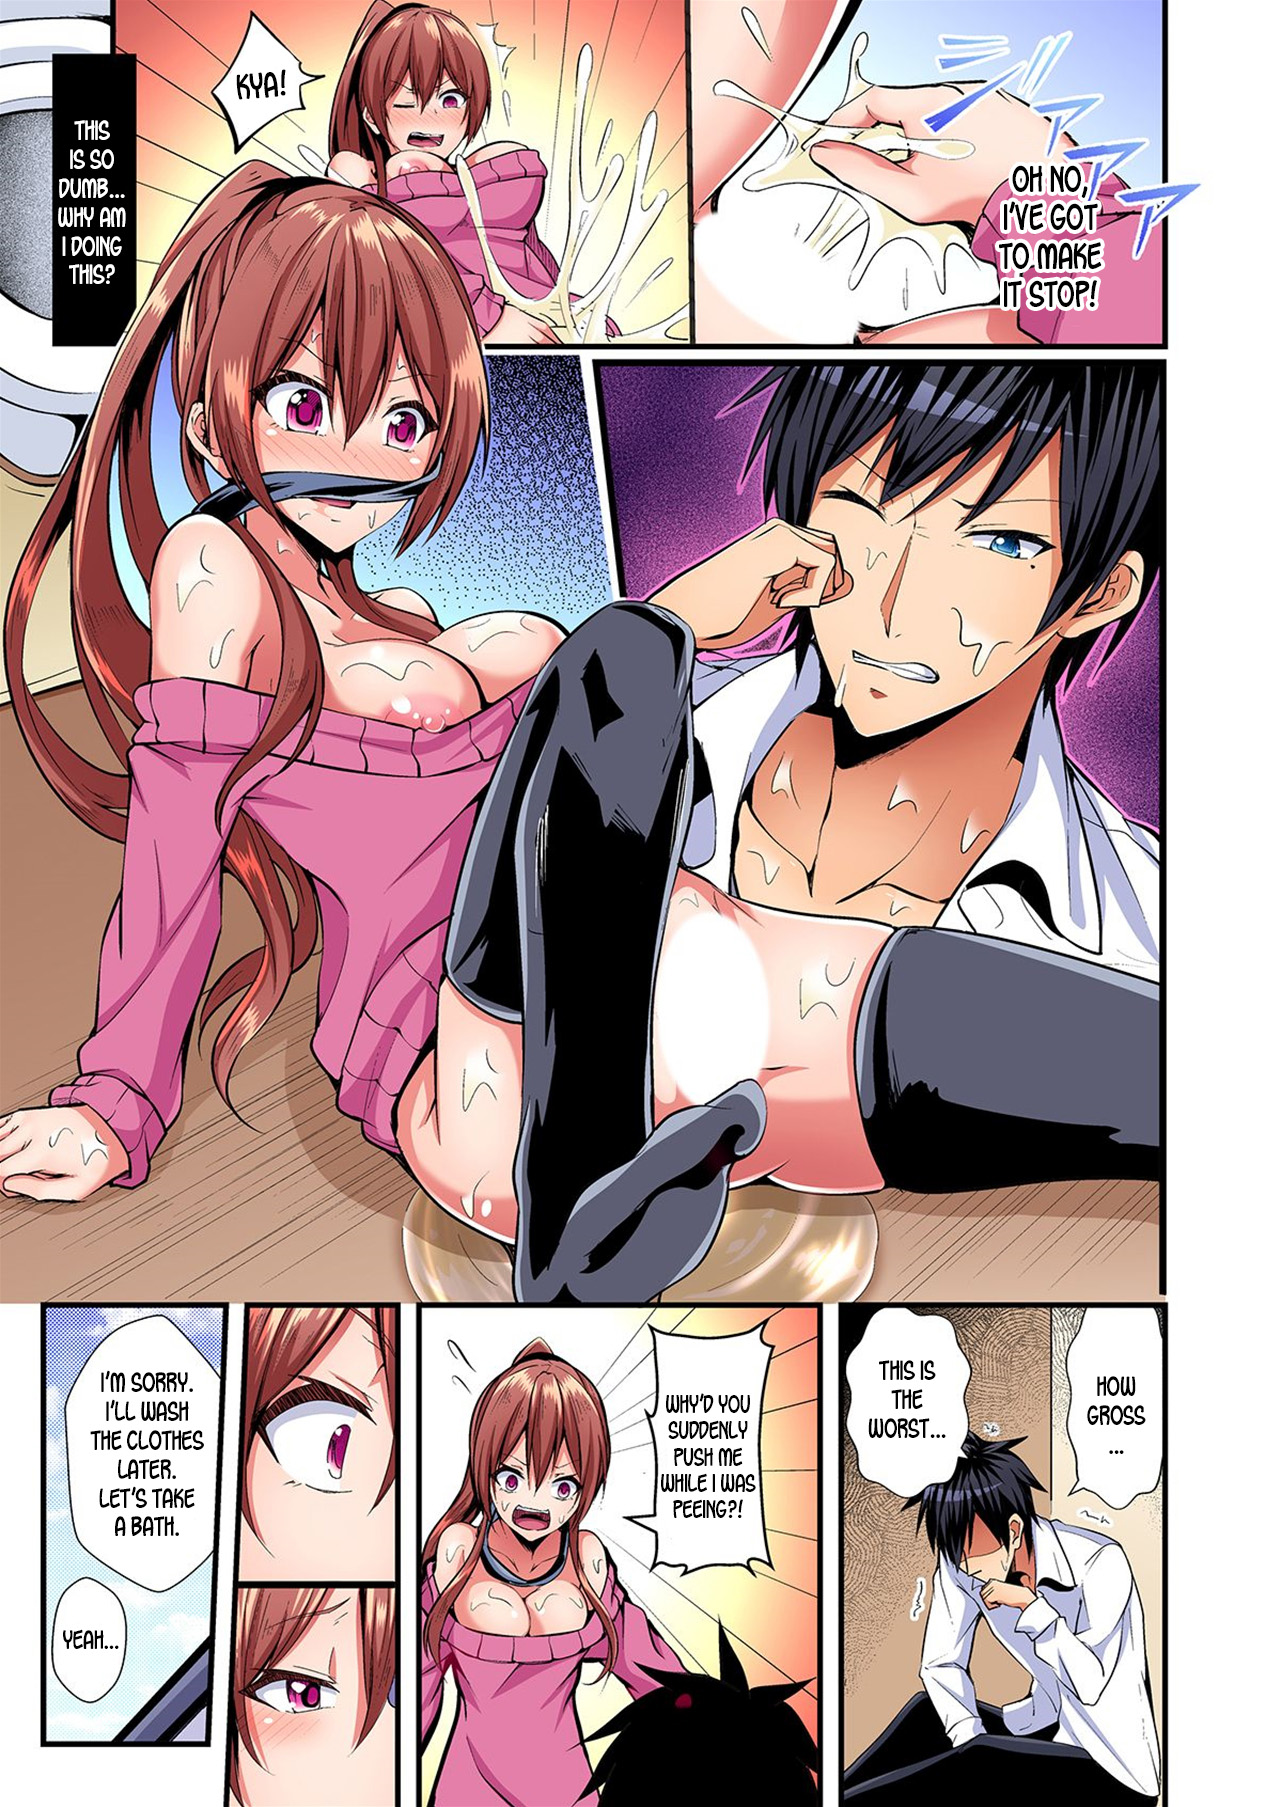 [Suishin Tenra] Switch bodies and have noisy sex! I can't stand Ayanee's sensitive body ch.1-2 [desudesu] page 16 full